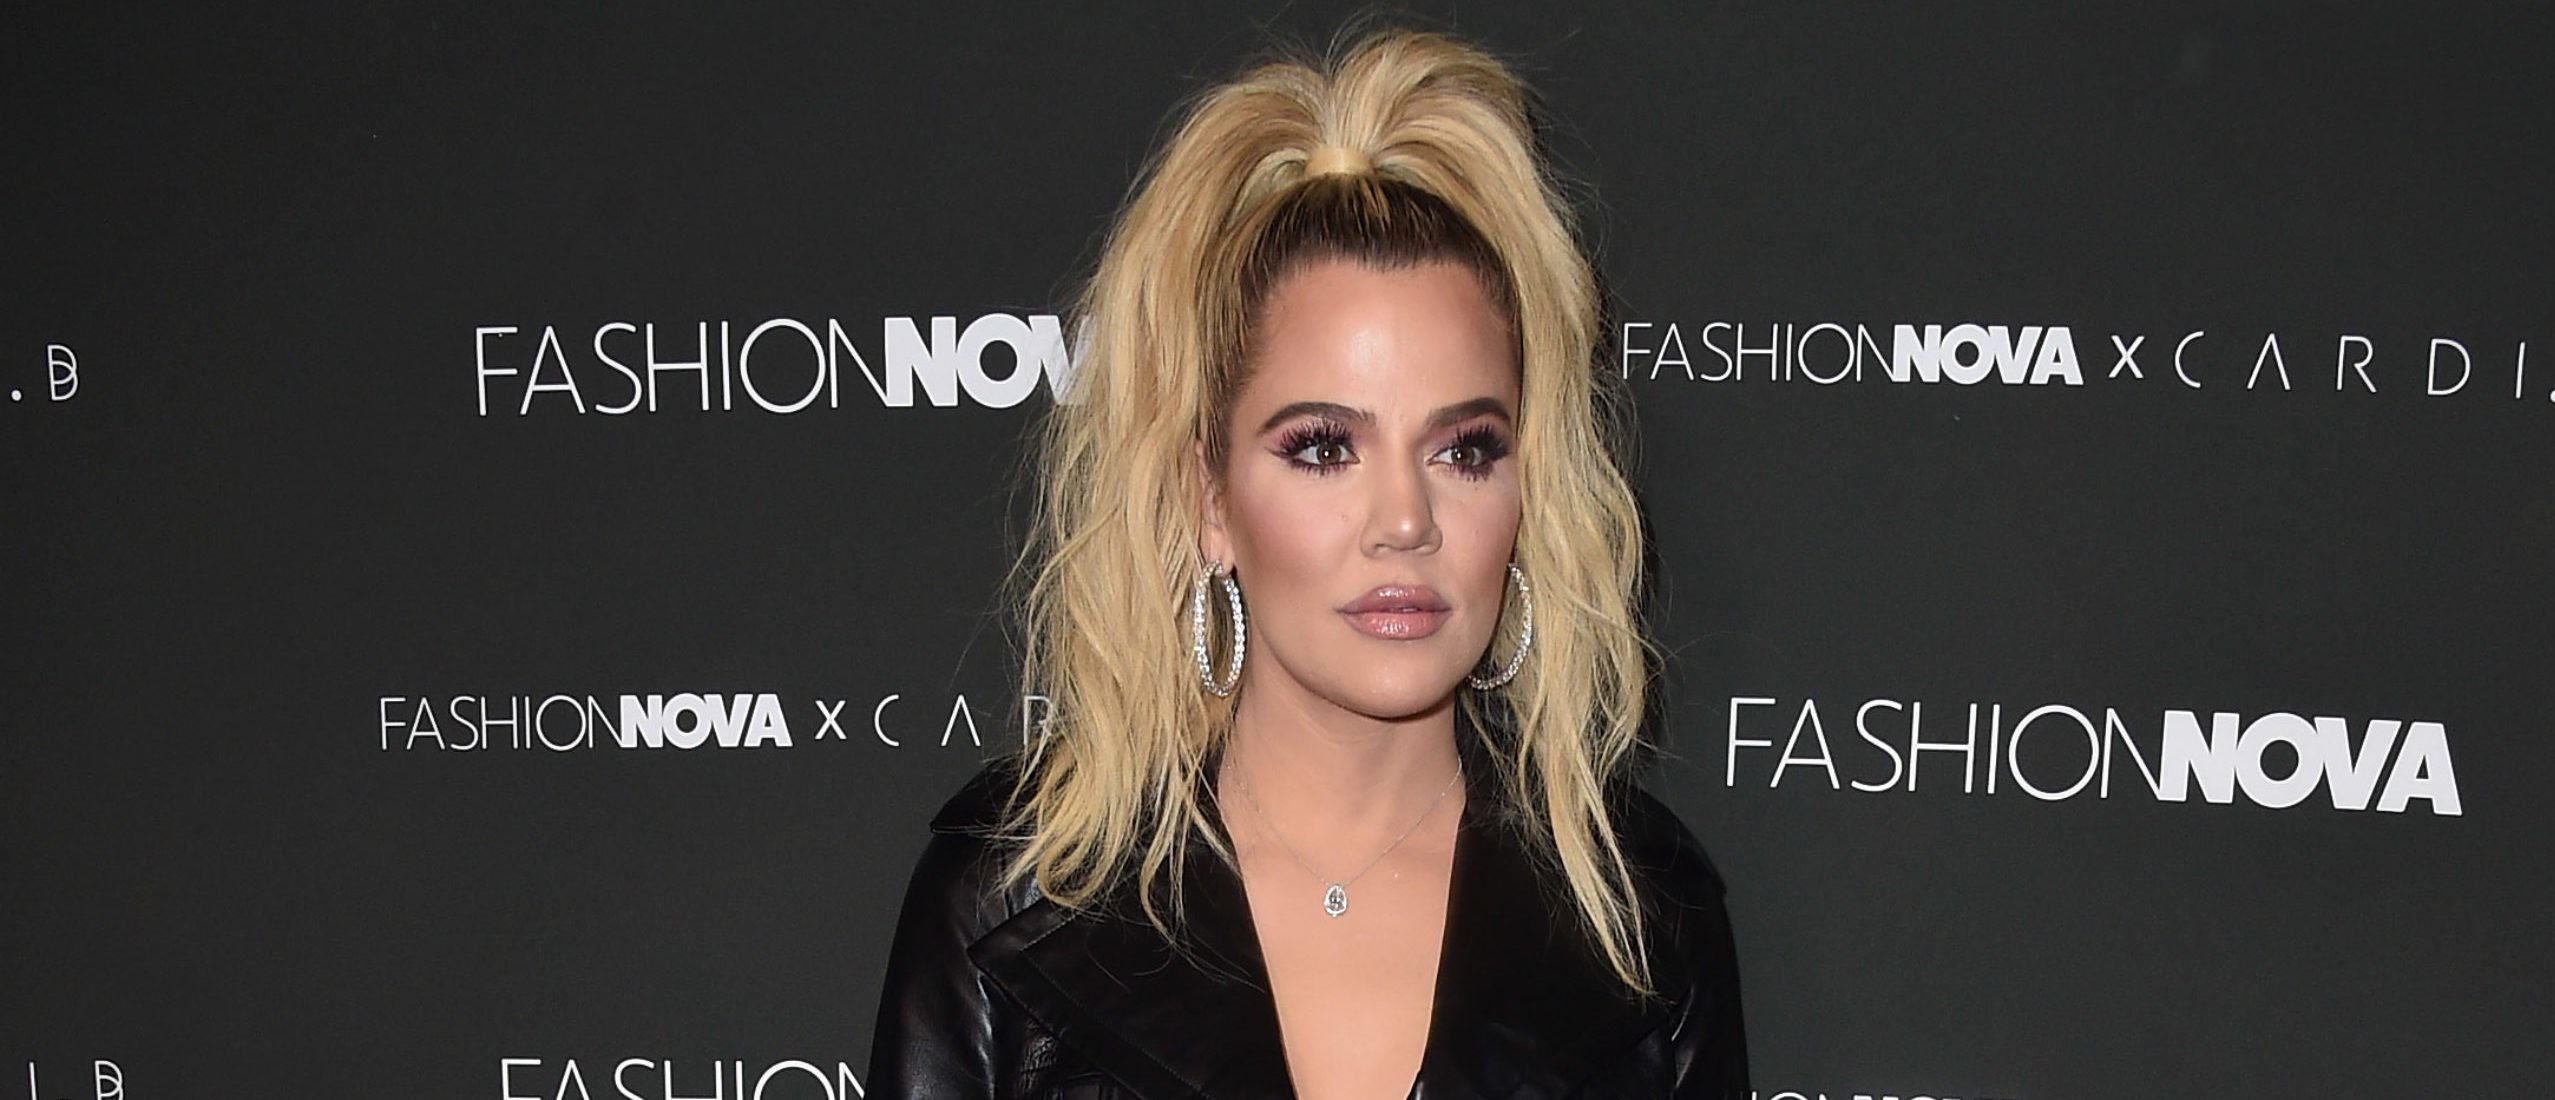 HOLLYWOOD, CALIFORNIA - NOVEMBER 14: Khloe Kardashian attends the Fashion Nova x Cardi B Collaboration Launch Event at Boulevard3 on November 14, 2018 in Hollywood, California. (Photo by Alberto E. Rodriguez/Getty Images)